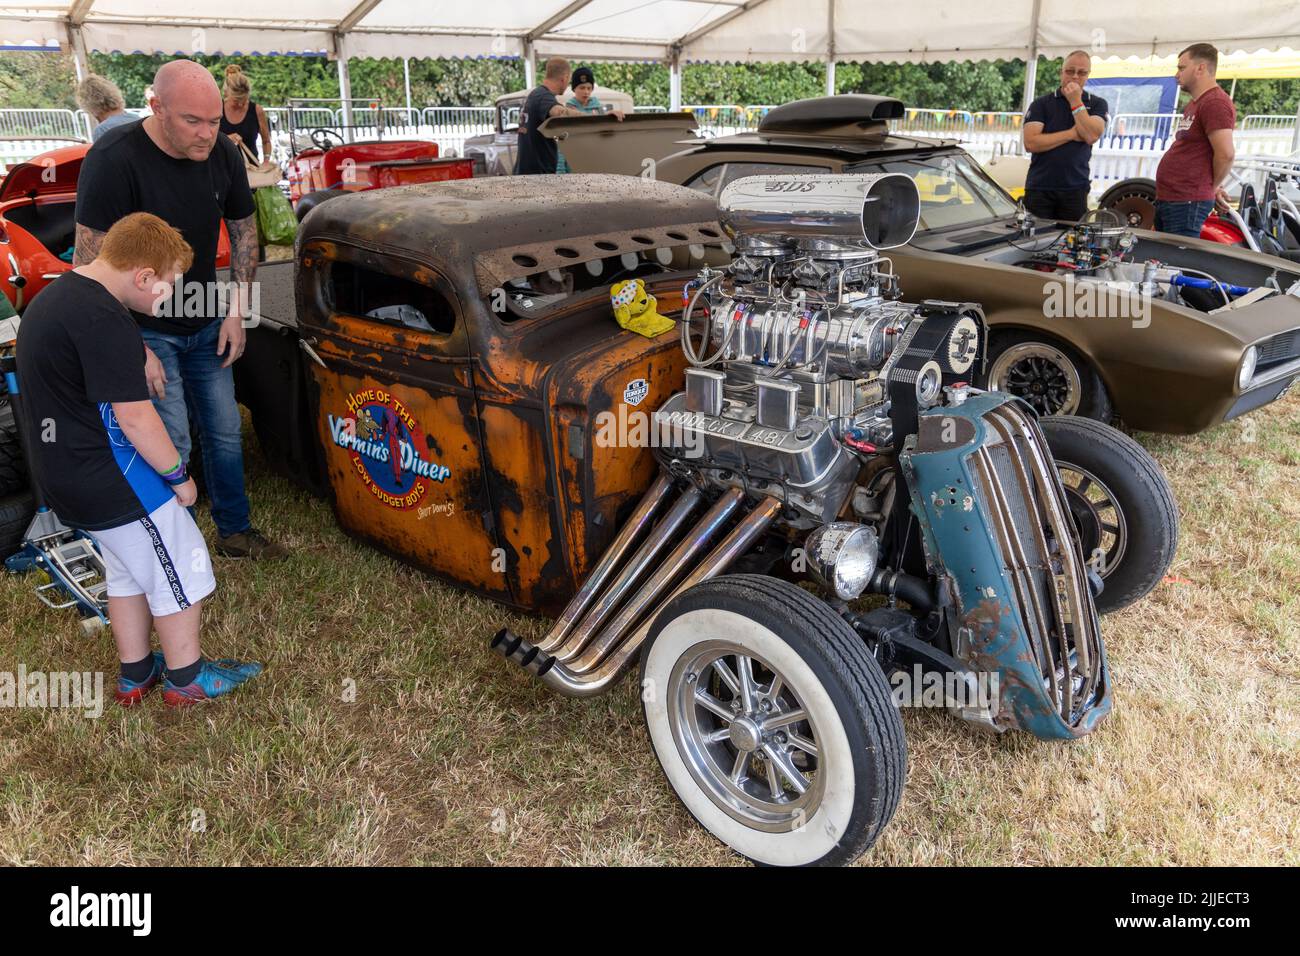 'Vermins Diner, Home of the Low Budget Boys' Rat Rod car at CarFest Stock Photo